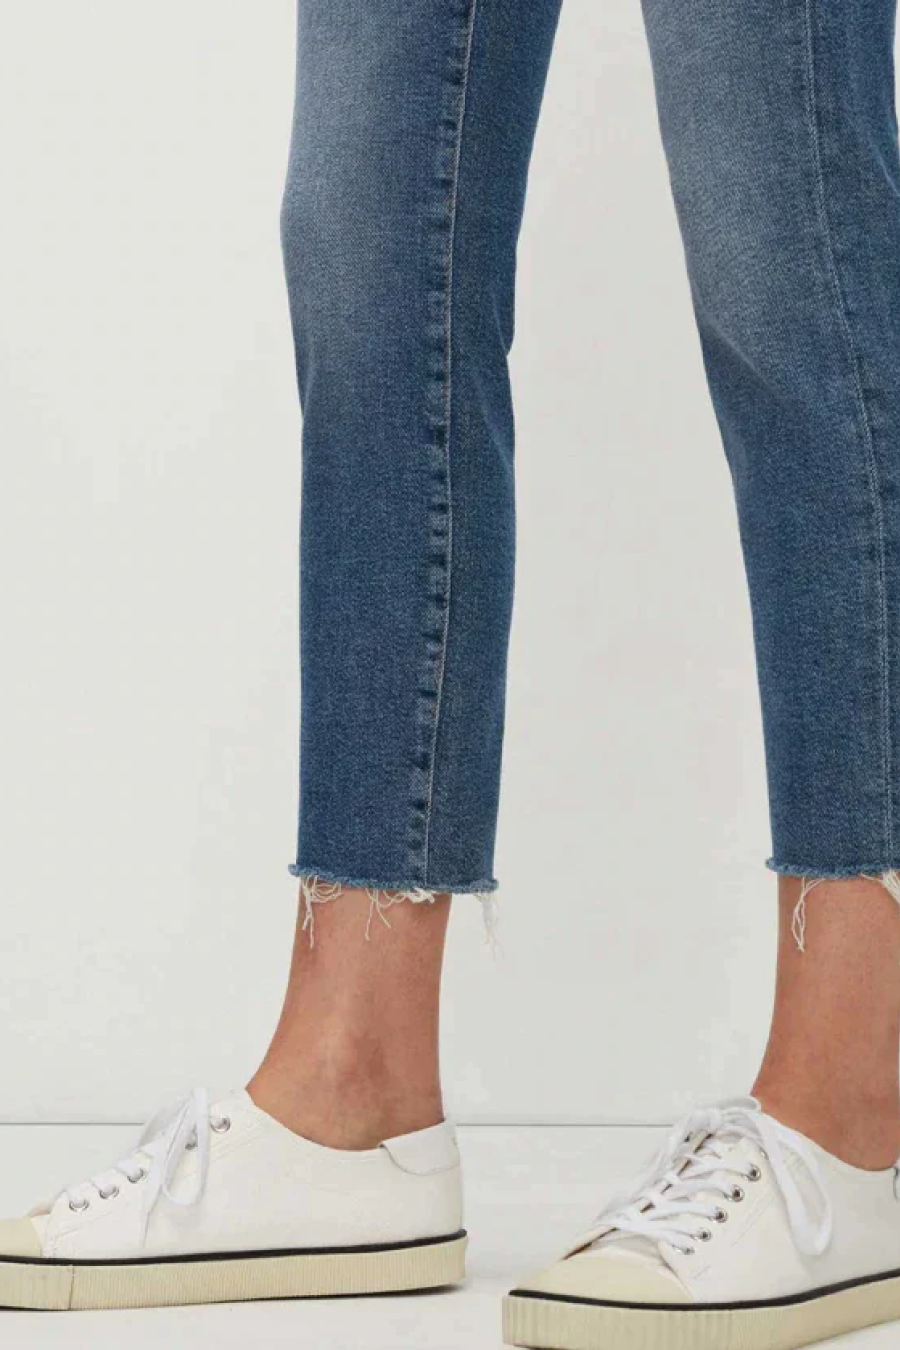 7 For All Mankind Roxanne Ankle Jean